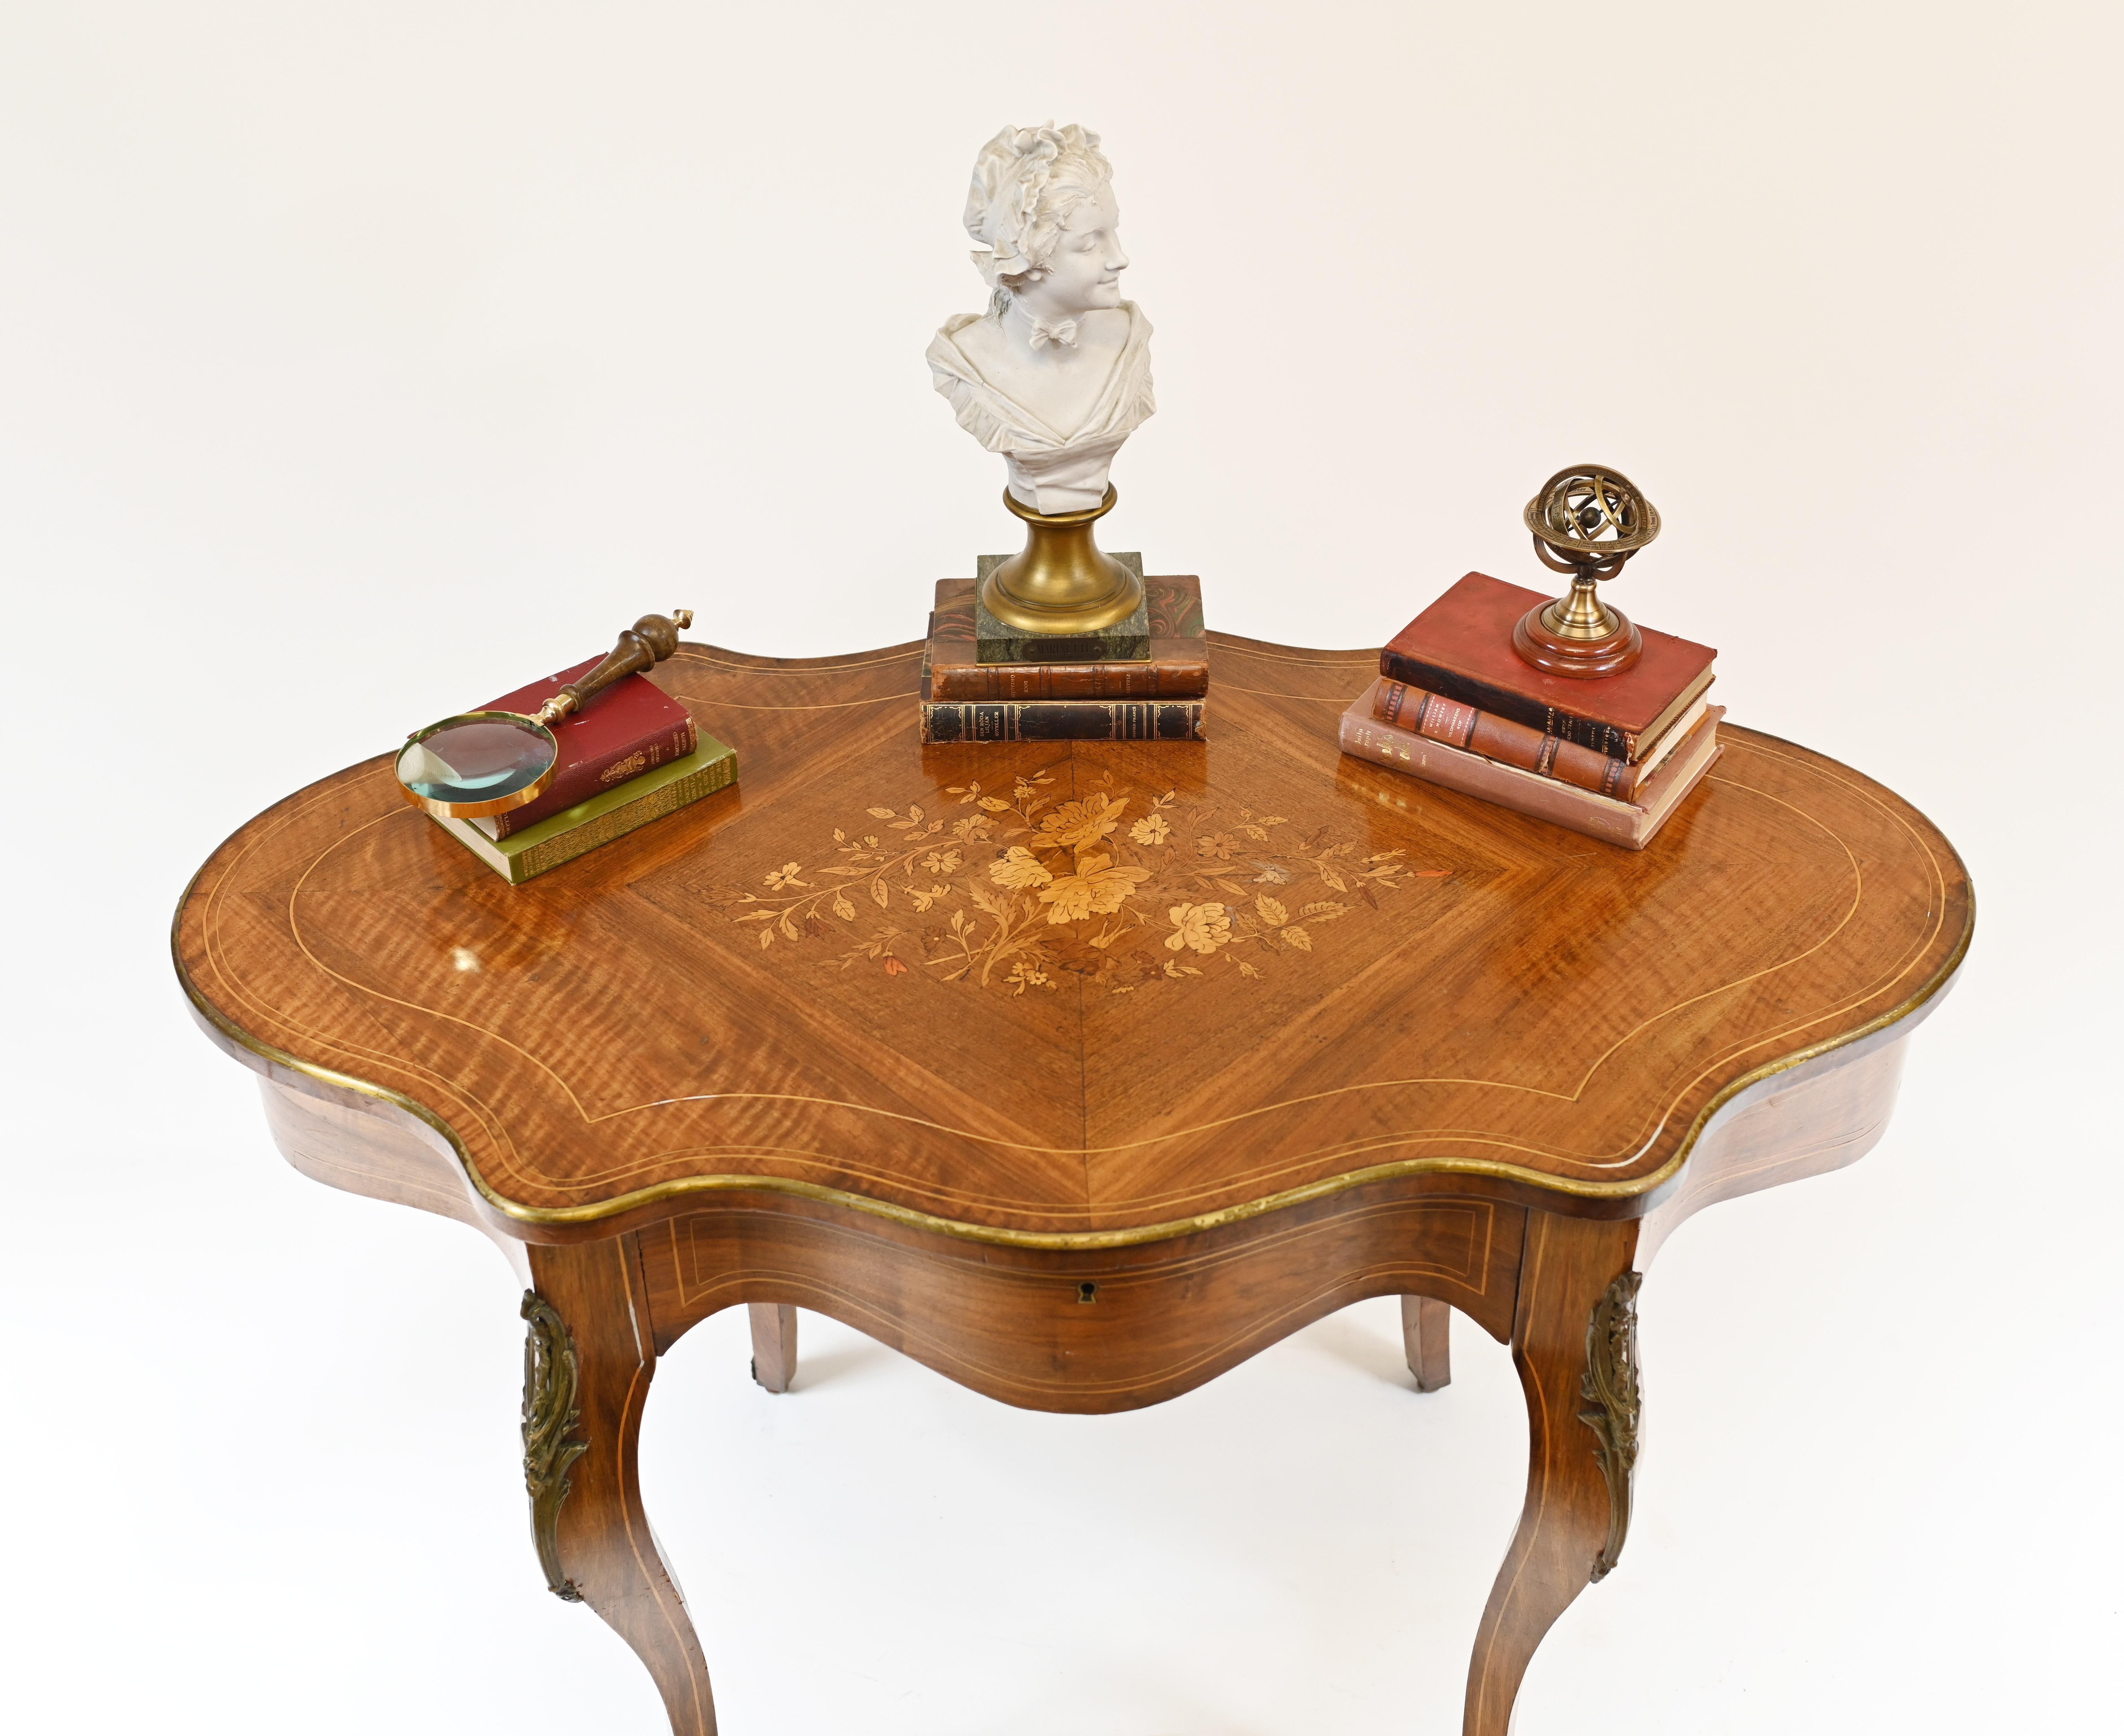 Elegant antique French desk or centre table 
Lovely shaped top with elegant top on cabriole legs
Original ormolu mounts
Circa 1880 
Inlay work very intricate showing floral motifs
Bought from a dealer on Marche Biron at Paris antiques